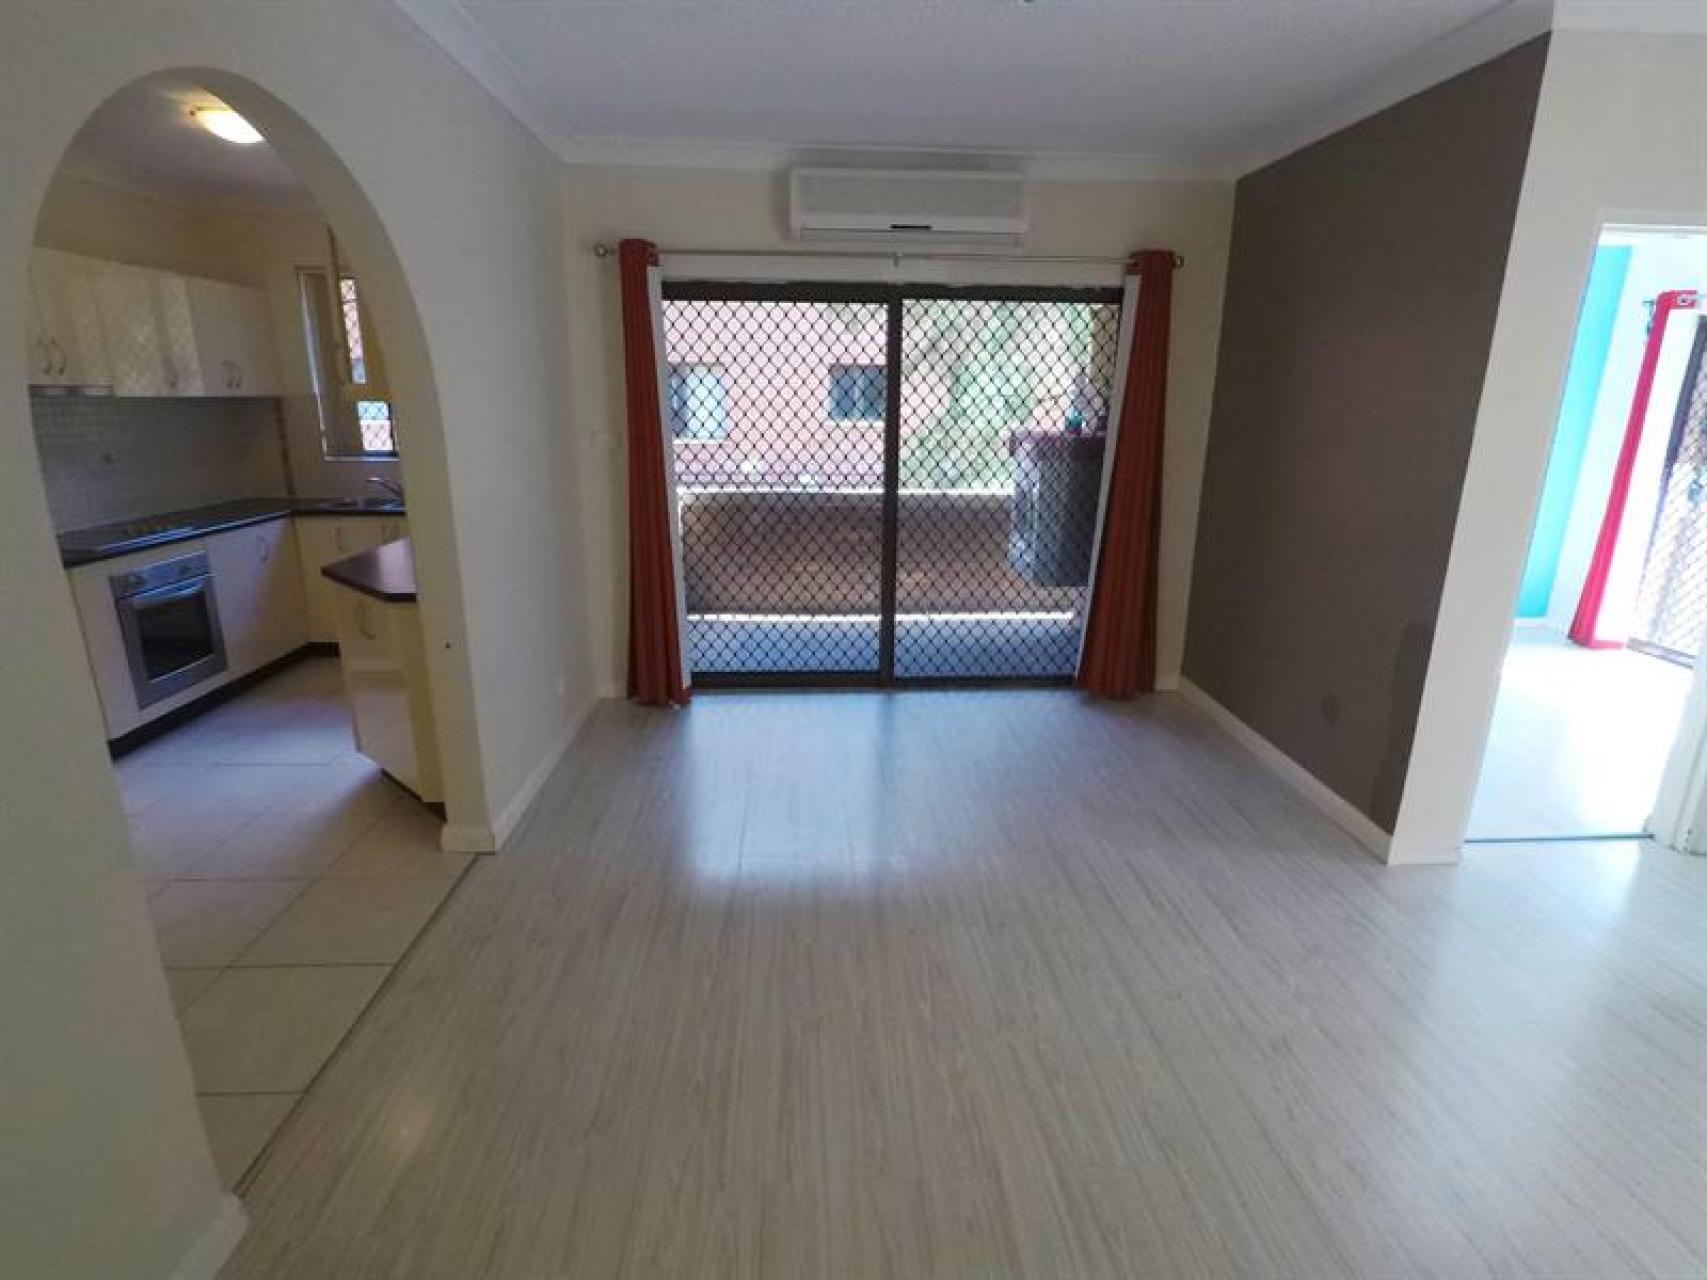 3/68 Castlereagh St, Liverpool, NSW 2170